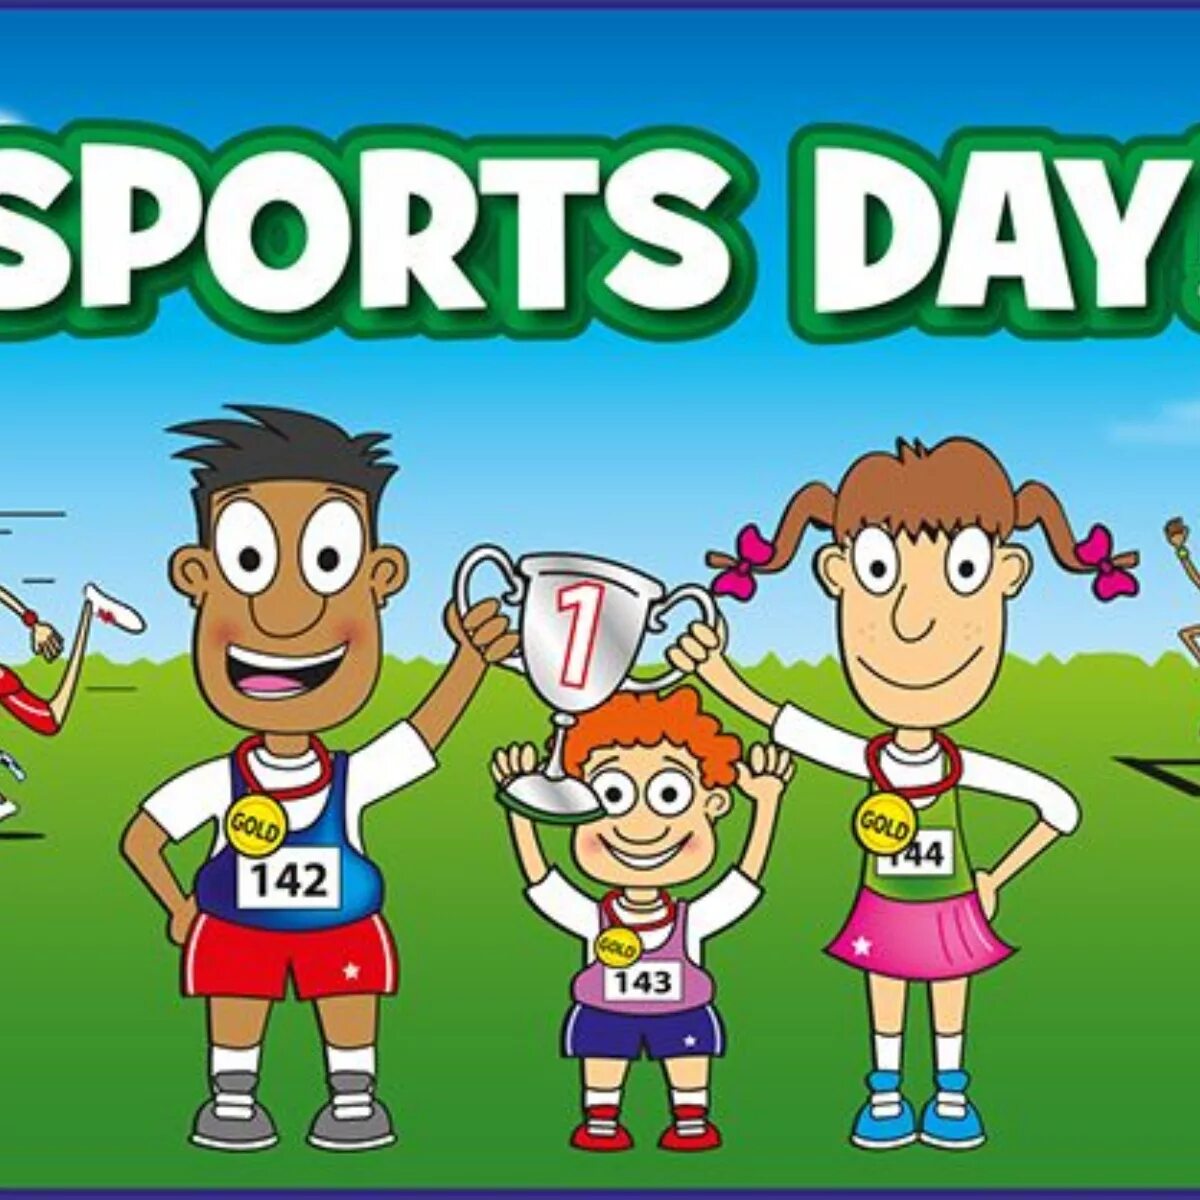 Sporting day. Sports Day. Sports Day at School 4 класс английский язык. Sport poster for Kids. Sports Day Day cartoons.